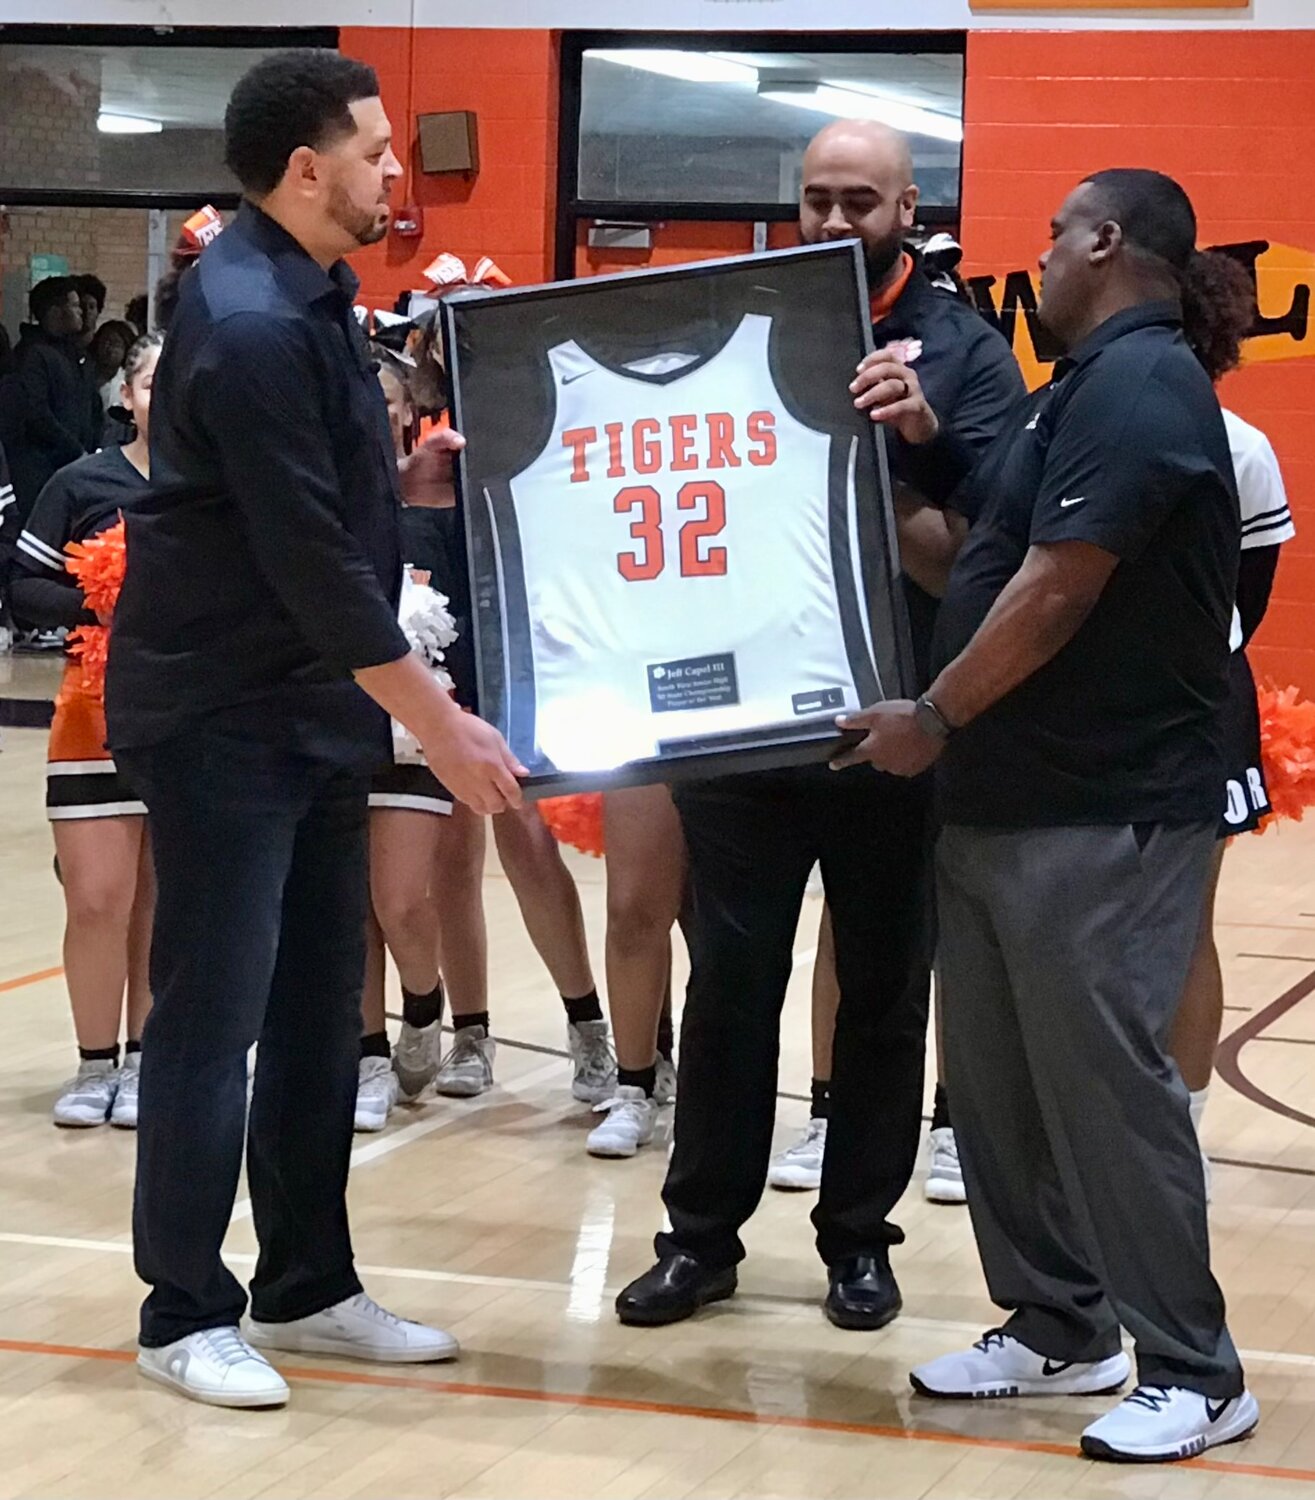 Jeff Capel III, left, receives his retired jersey from South View athletic director James Blue, center, and Tiger varsity football coach Rodney Brewington, right.